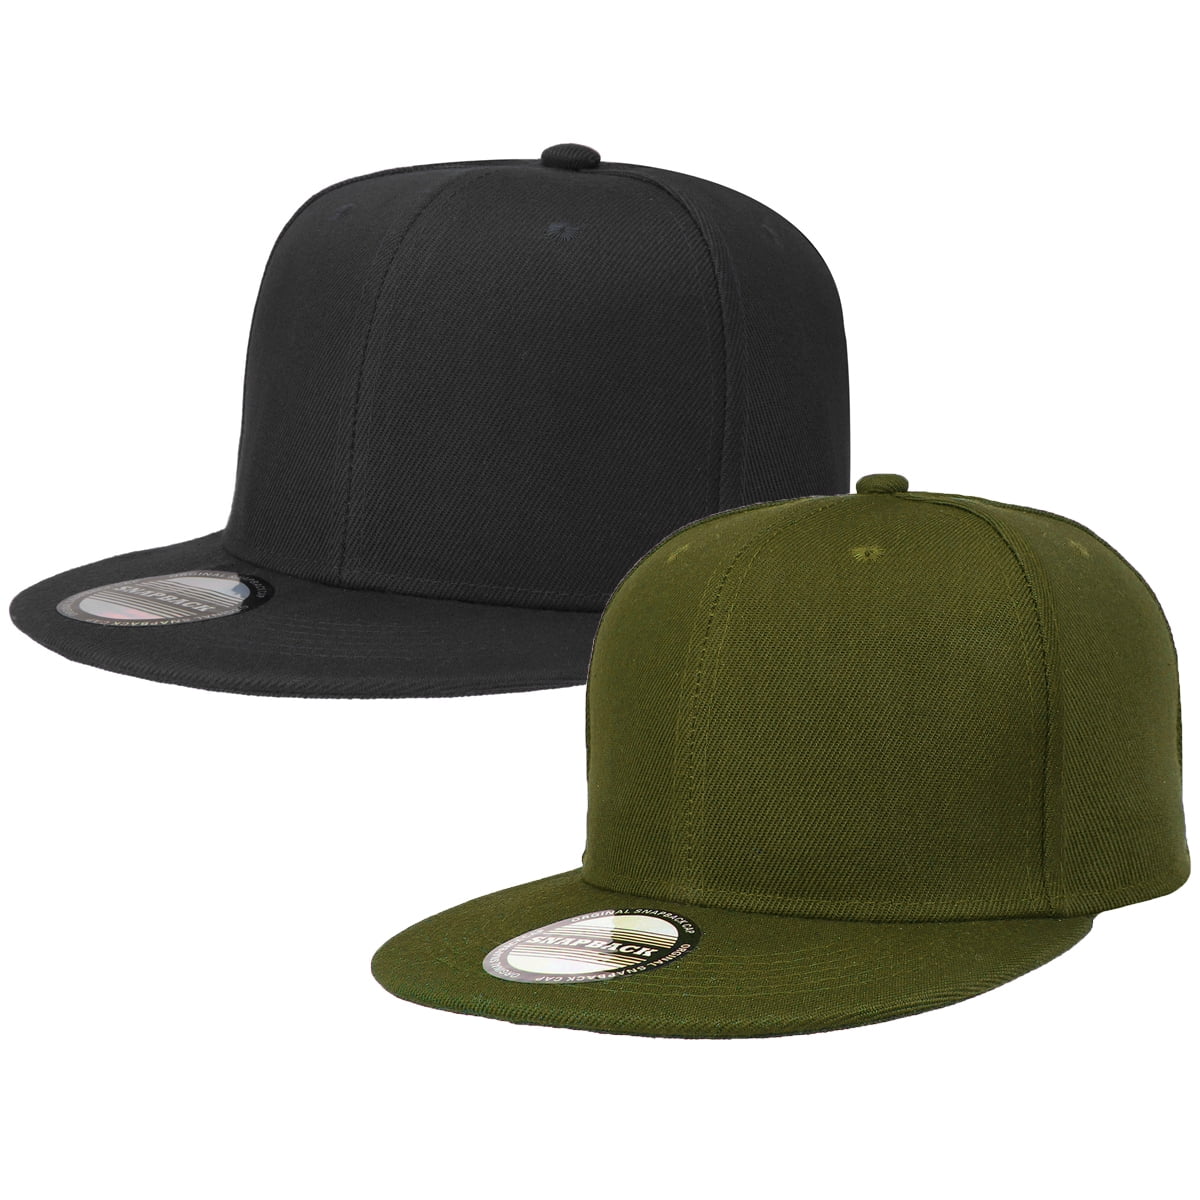 2-pack Classic Snapback Hat Cap Hip Hop Style Flat Bill Blank Solid Color Adjustable Size Black & Army Green